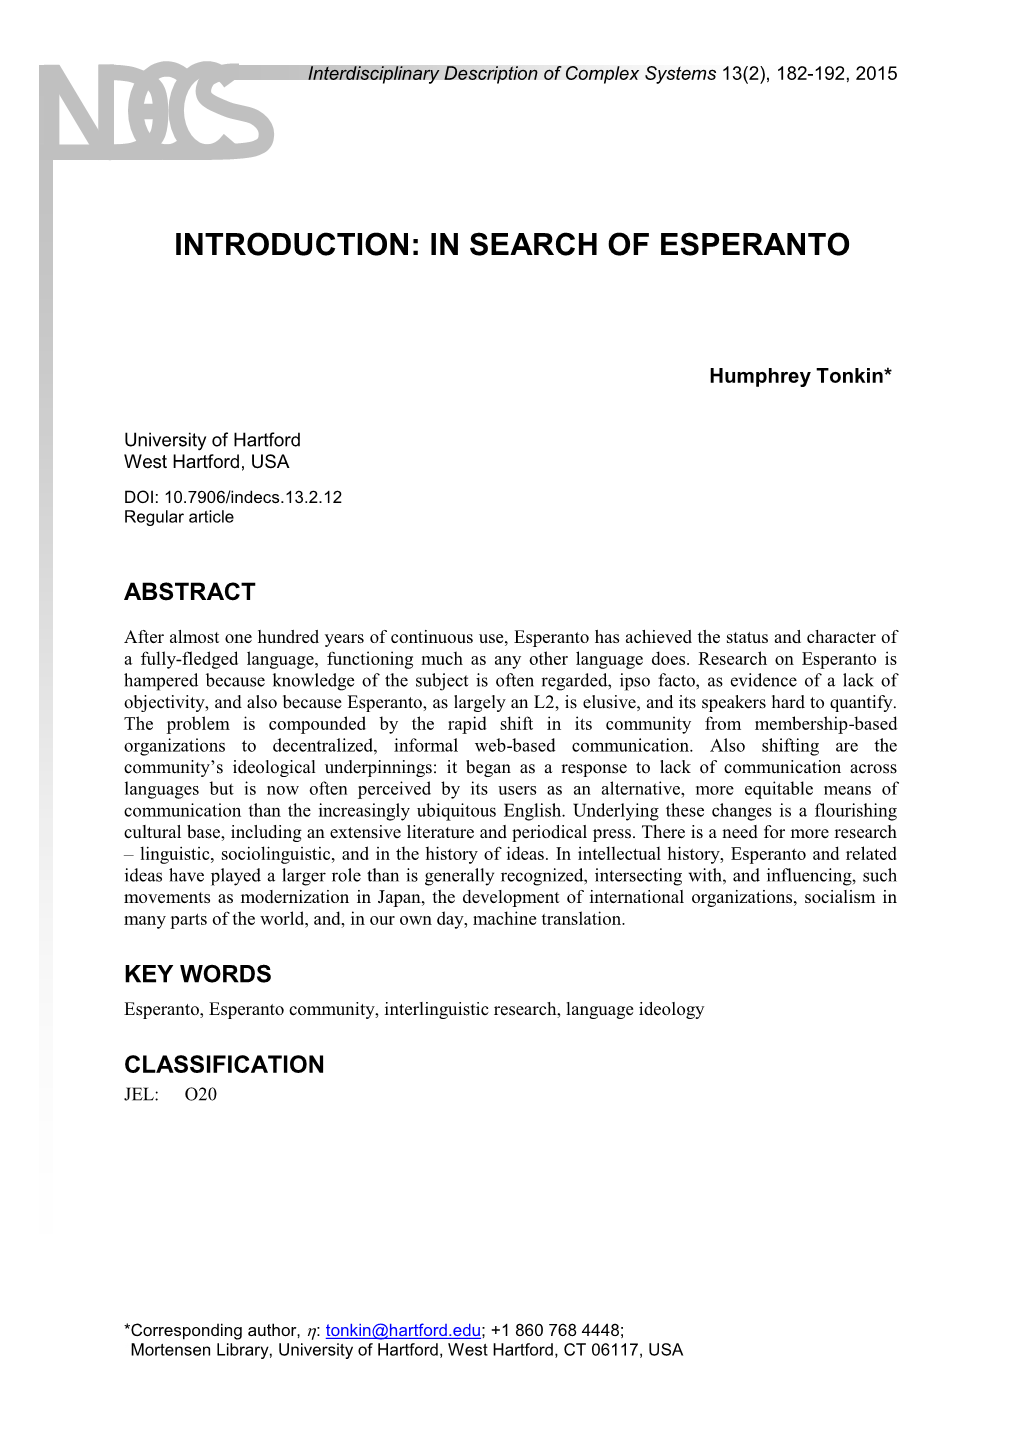 Introduction: in Search of Esperanto